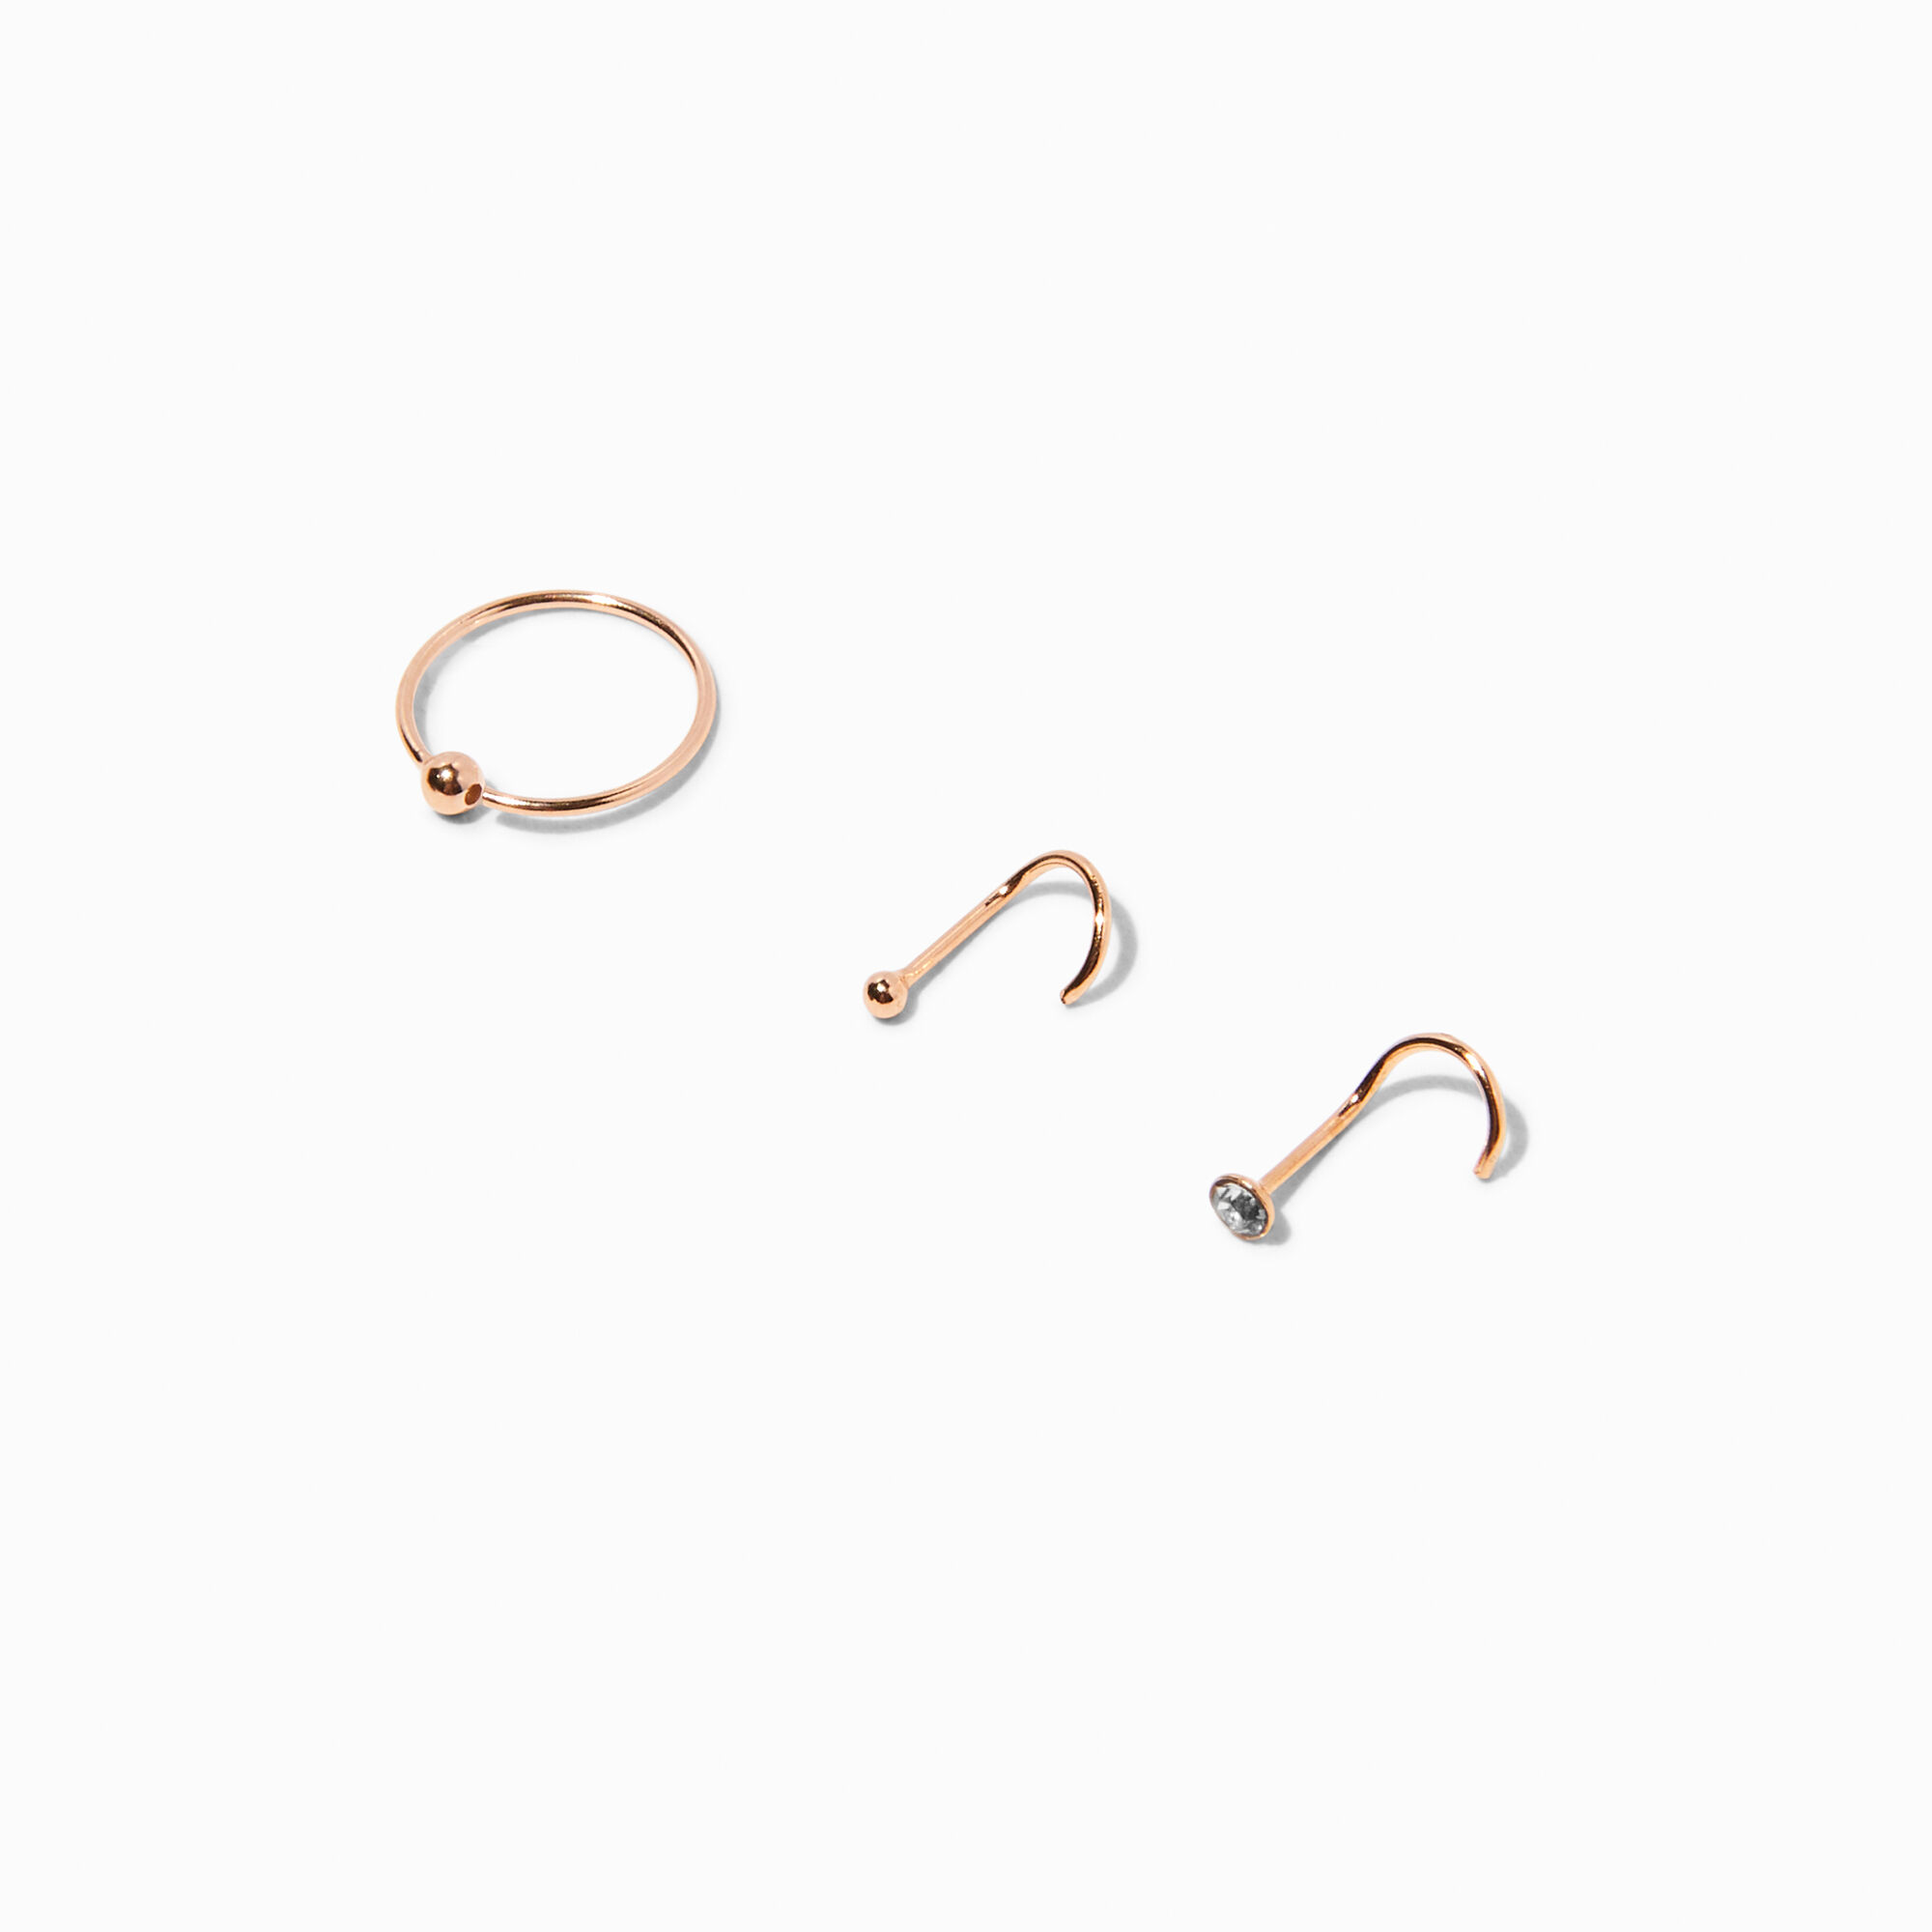 View Claires 22G Rose GoldTone Nose Studs Rings 3 Pack Silver information